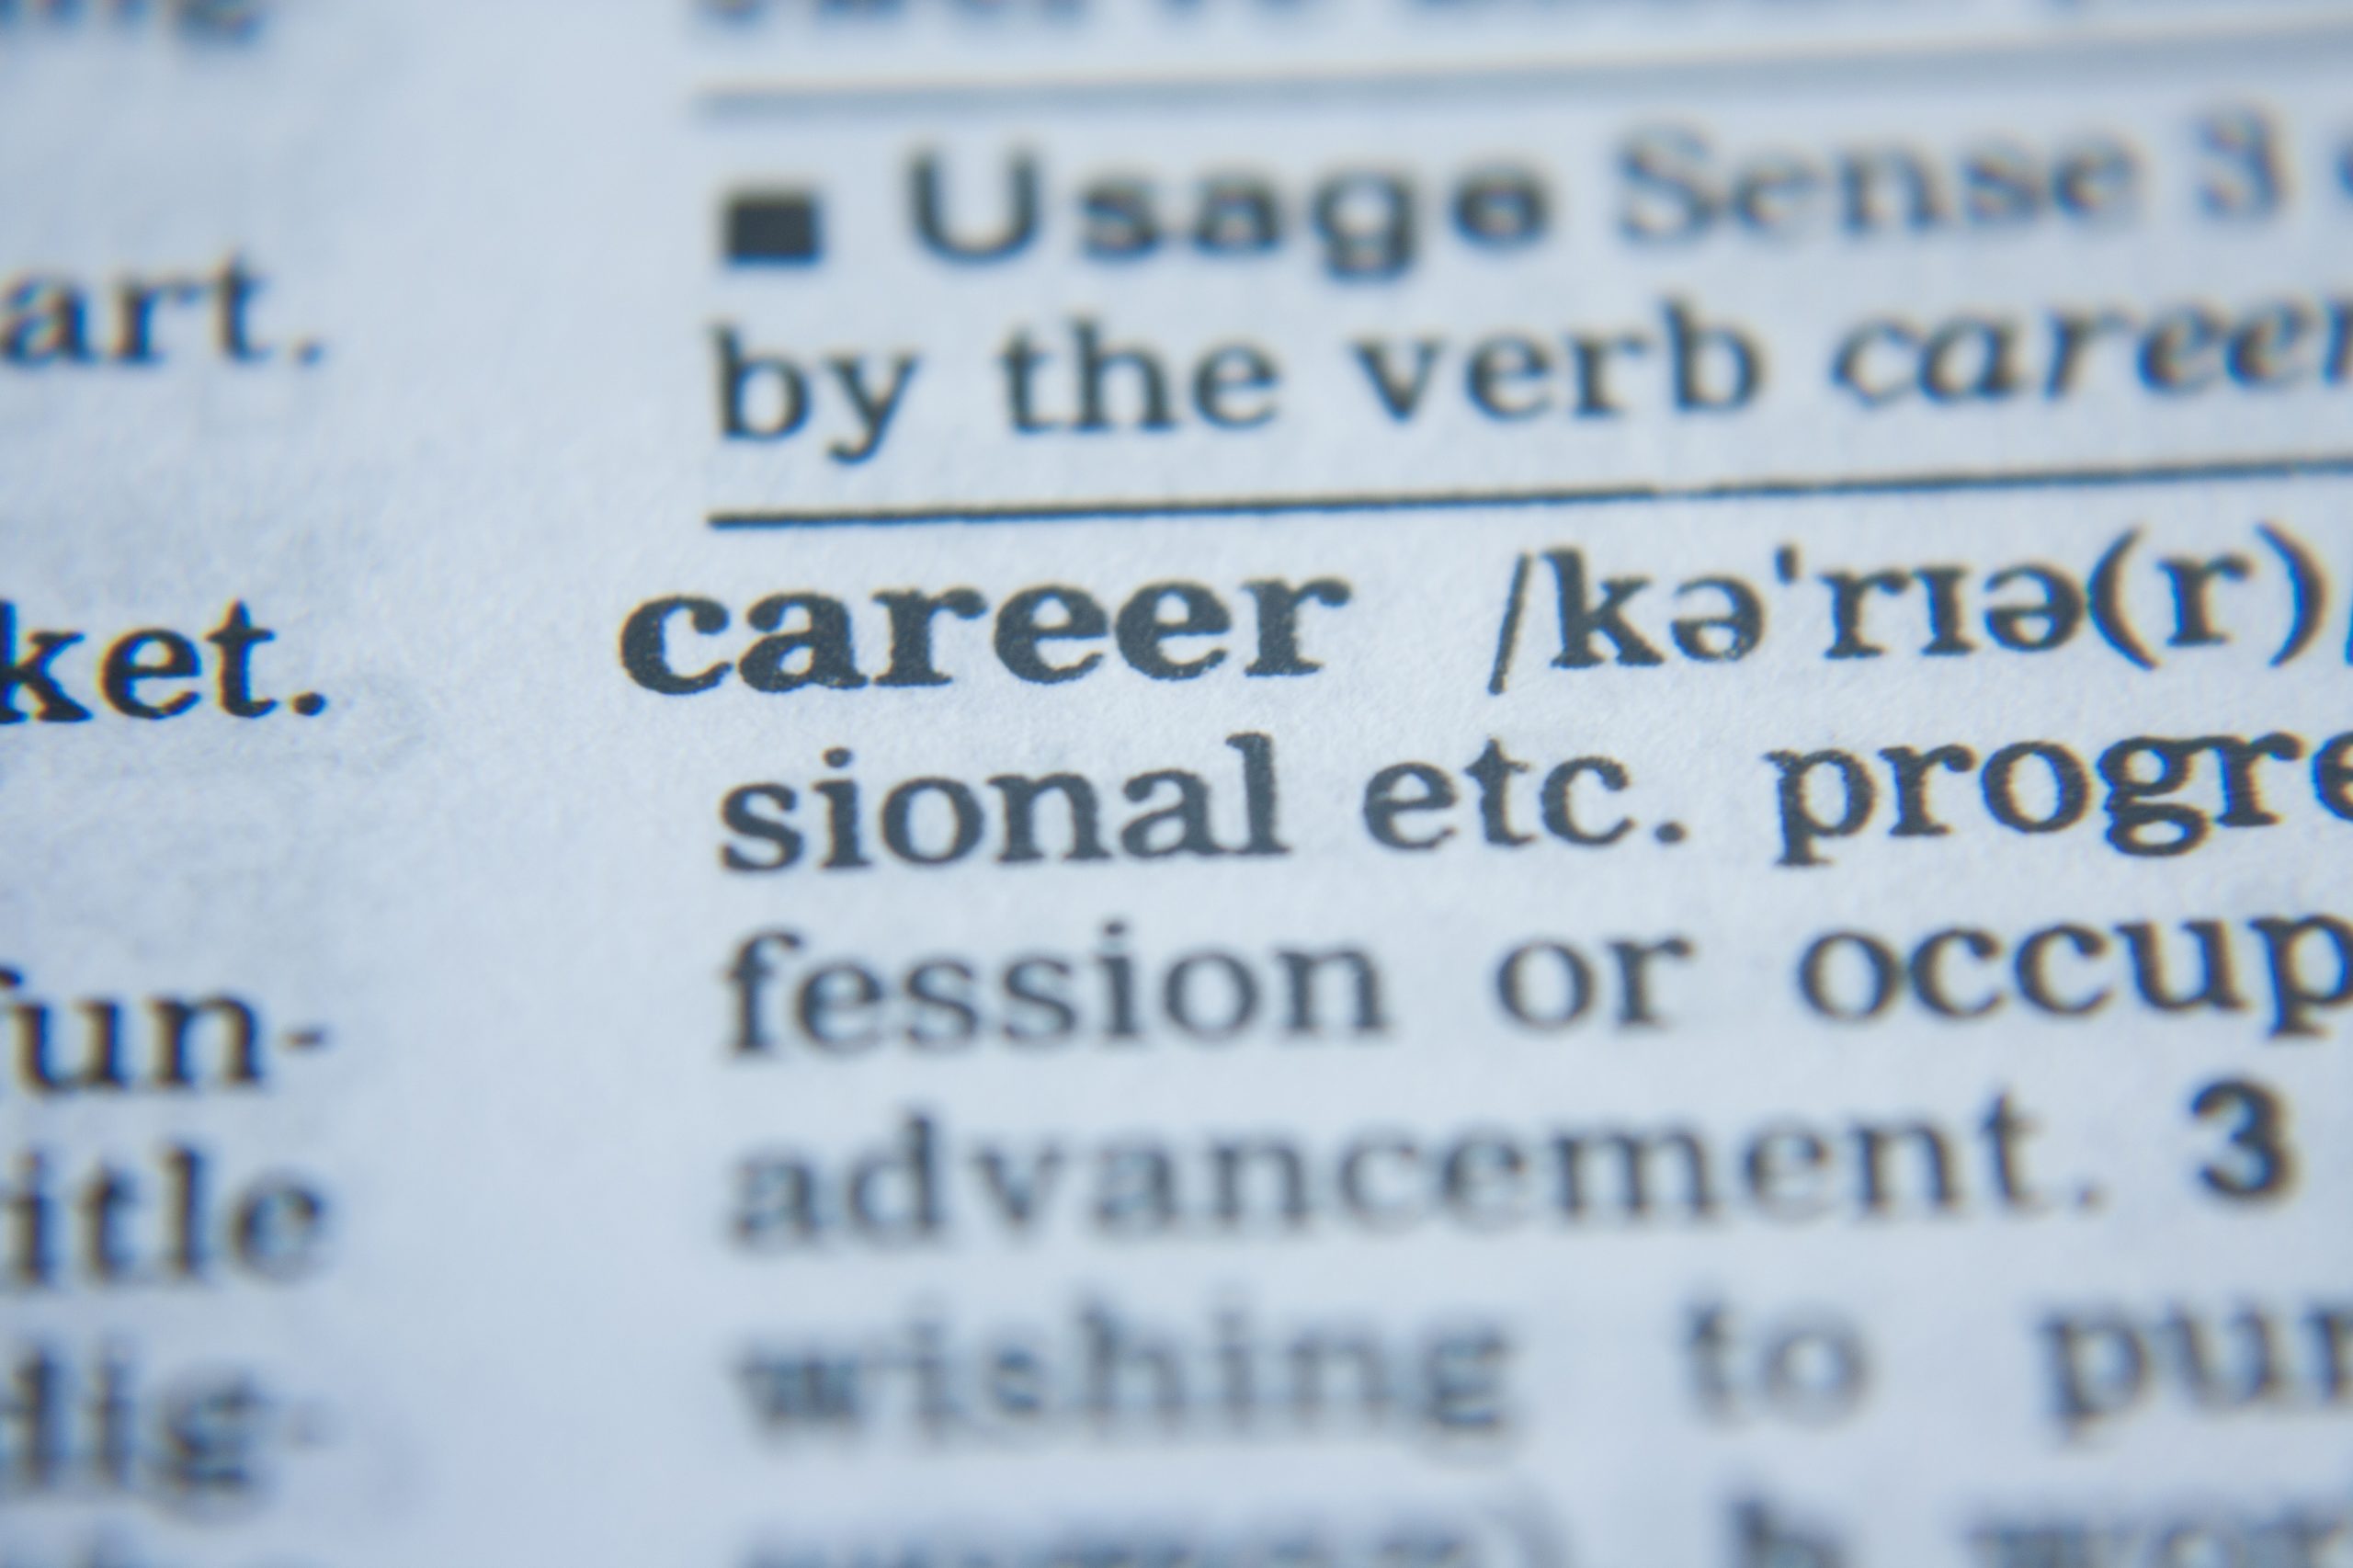 Image of lots of black text on a white piece of paper, zoomed in on the word “career”.